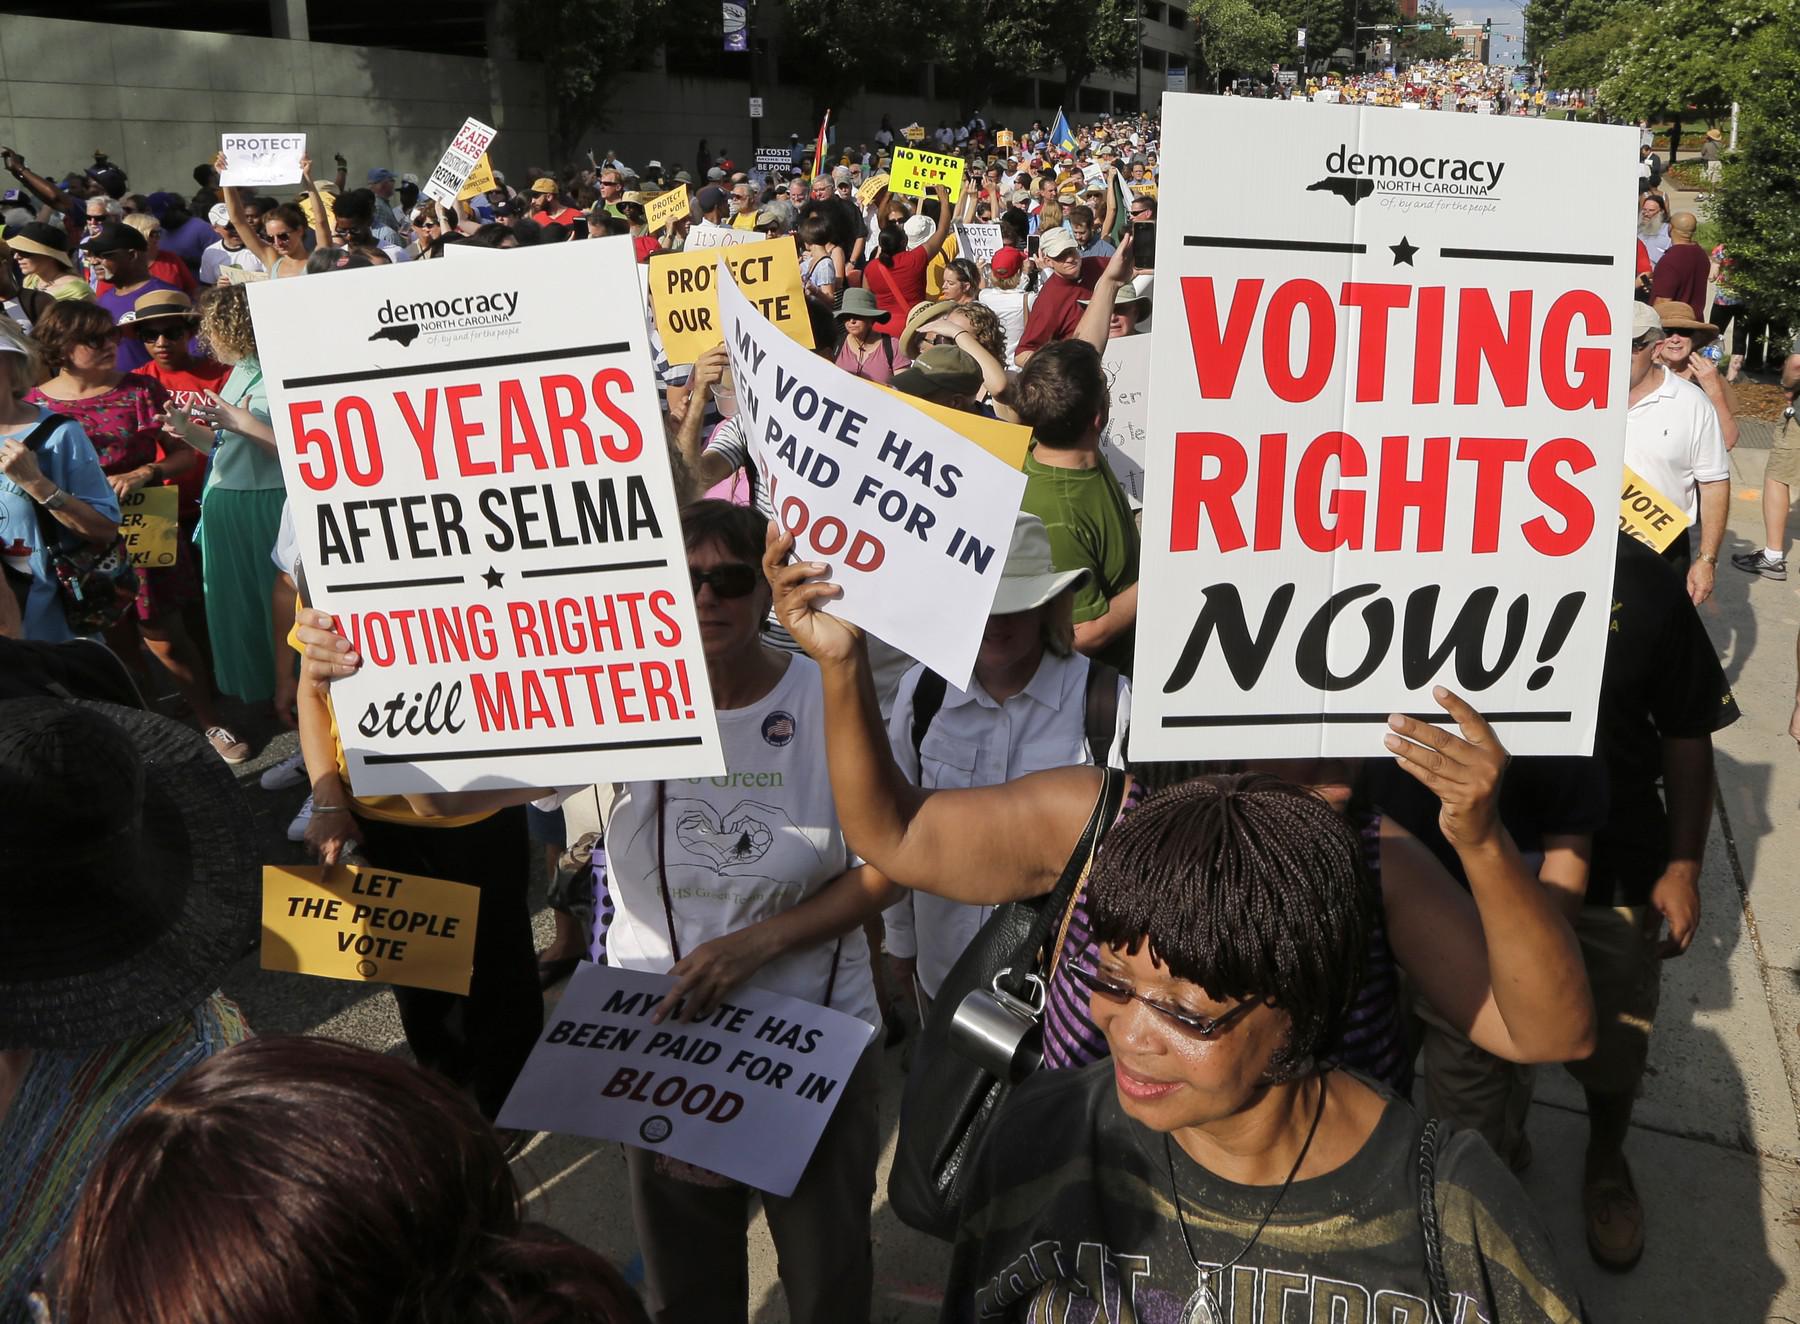 Voting Rights: Will Court Deliver? - The American Prospect